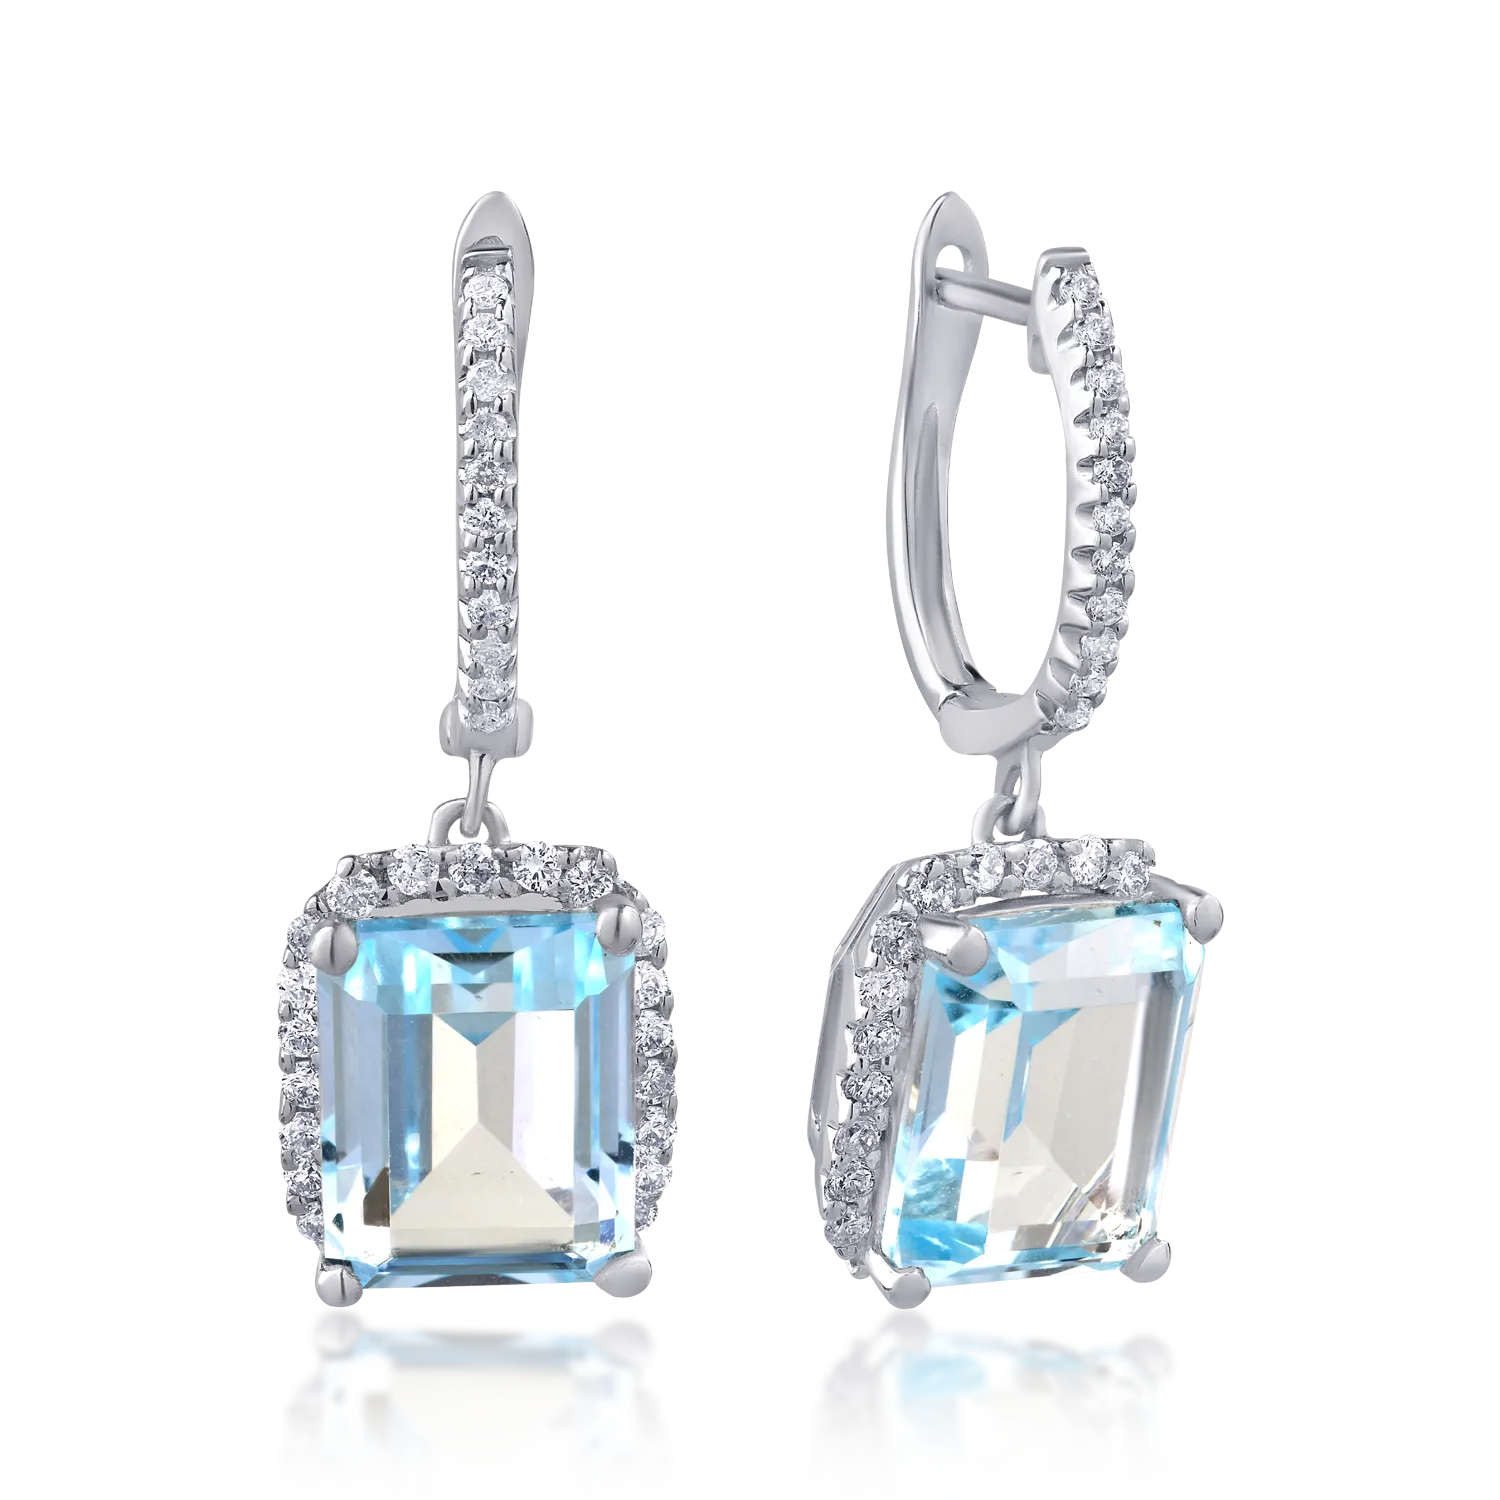 18K white gold earrings with 8.54ct blue topazes and 0.49ct diamonds